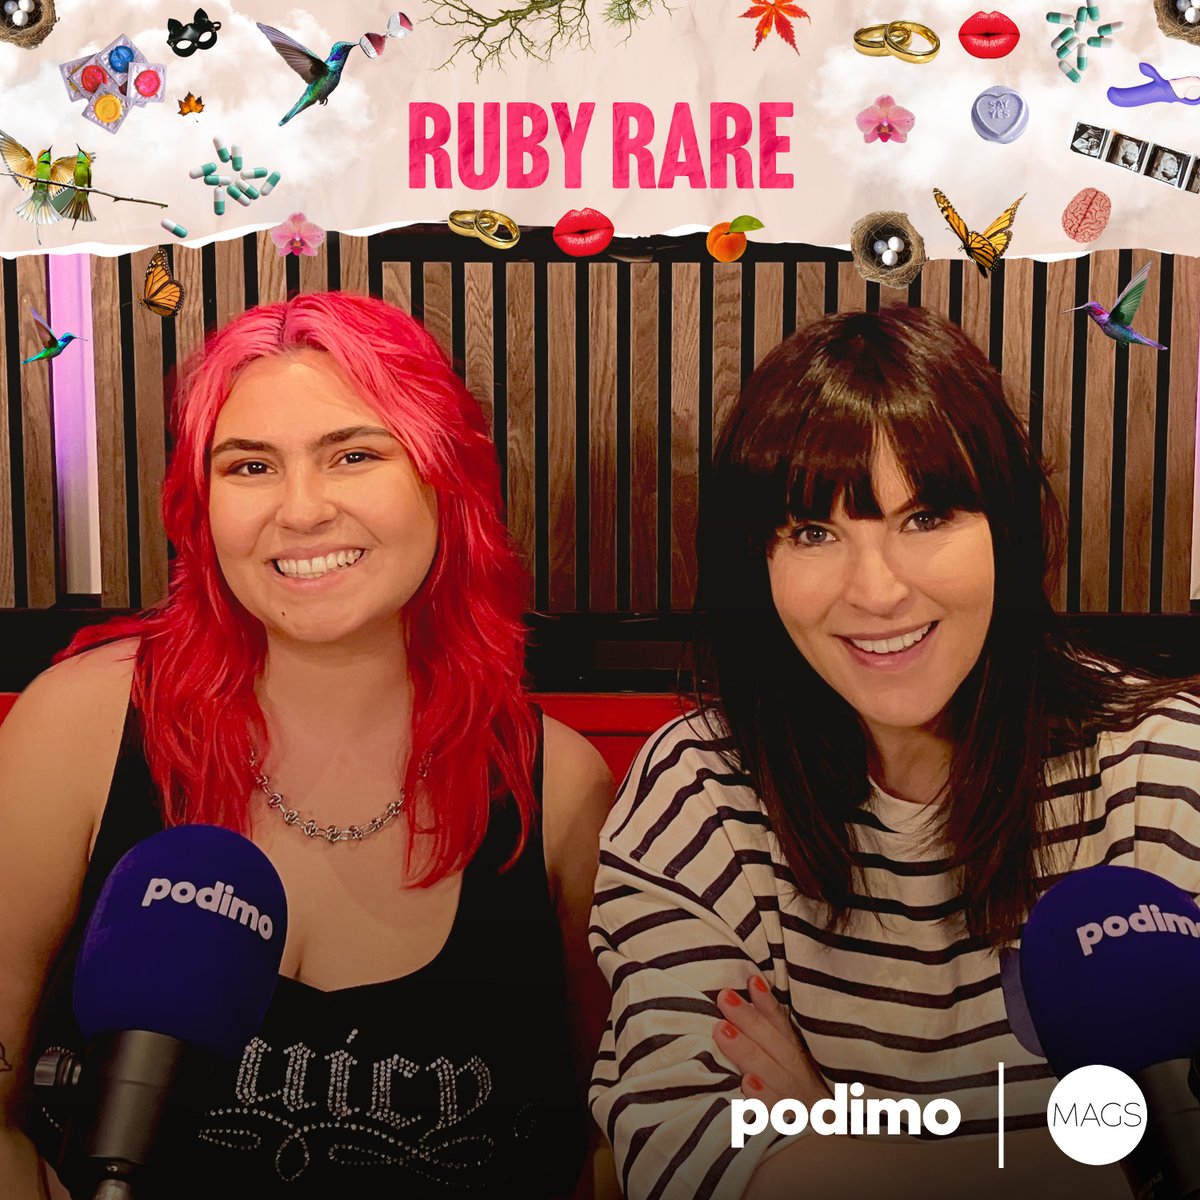 🚨NEW EPISODE ft. RUBY RARE🚨 All about non-monogamy, polyamory and camping under the influence of thrush 🤣 Listen to the new episode now: itcantjustbeme.co.uk #ItCantJustBeMe #ICJBM #Relationship #Help @annarichardso